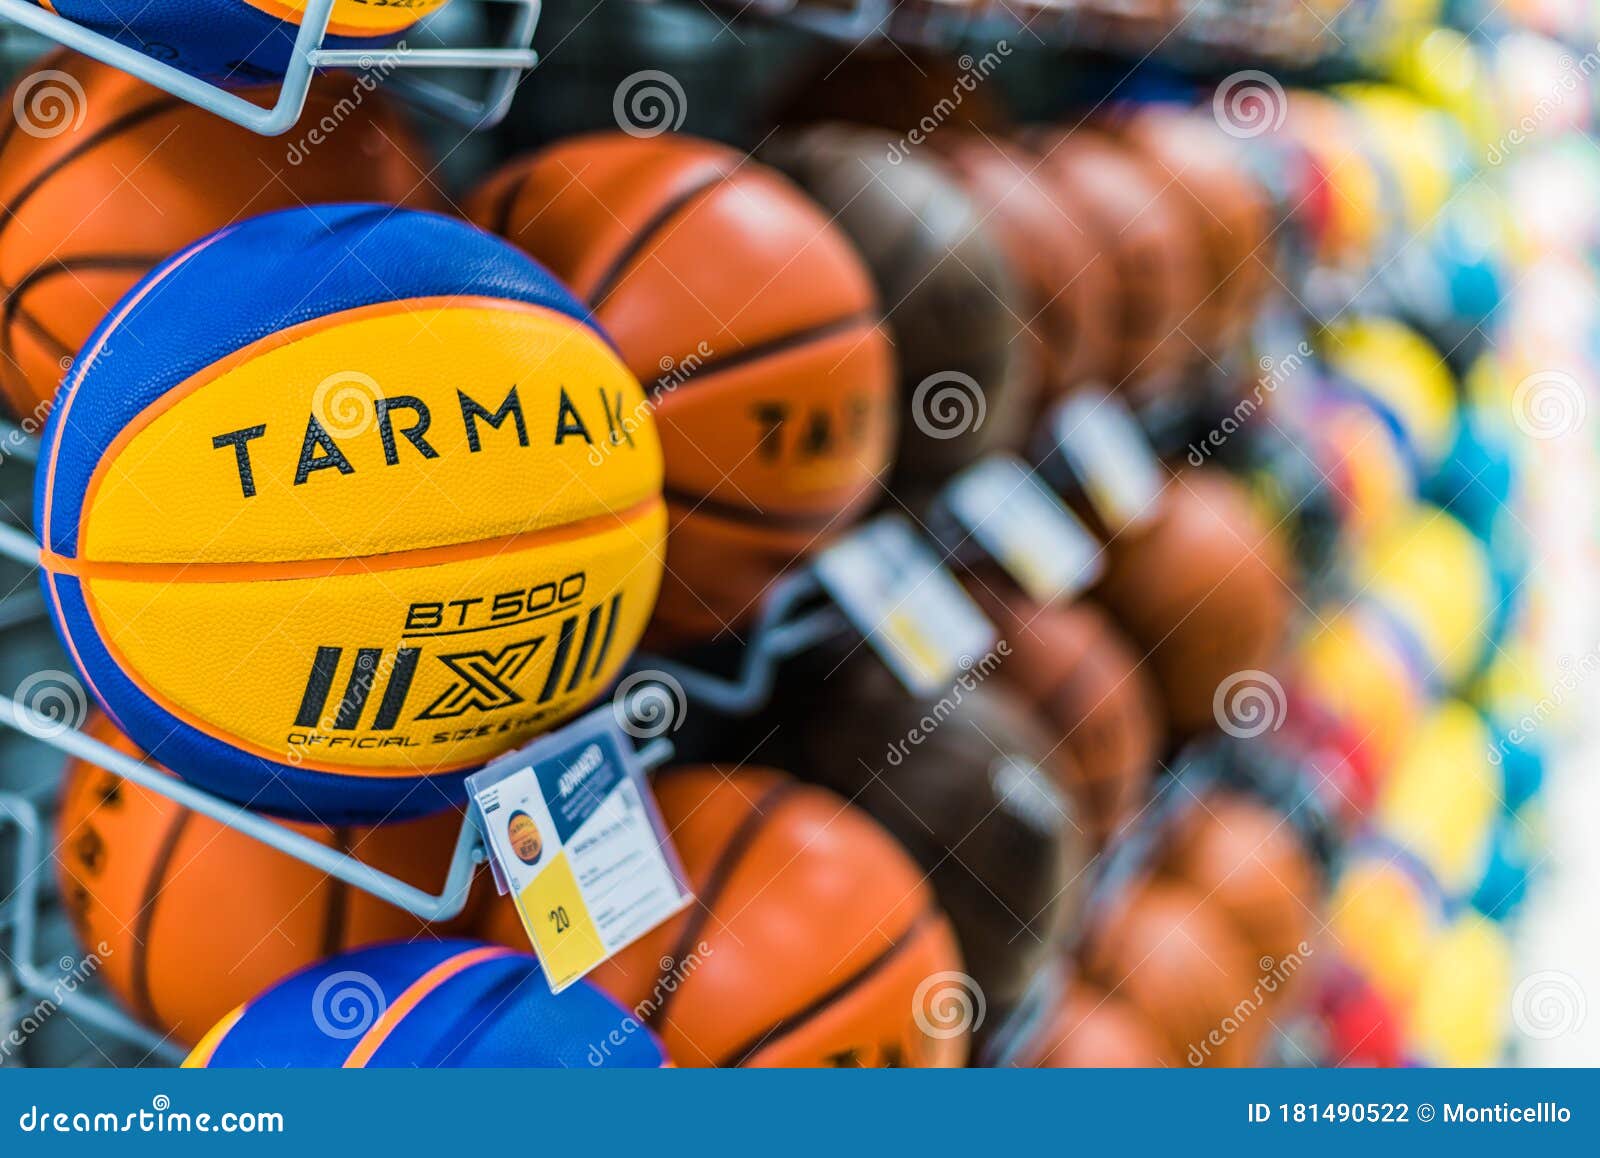 Tarmak Basketballs Put Up for Sale in the Decathlon Store Editorial Photography